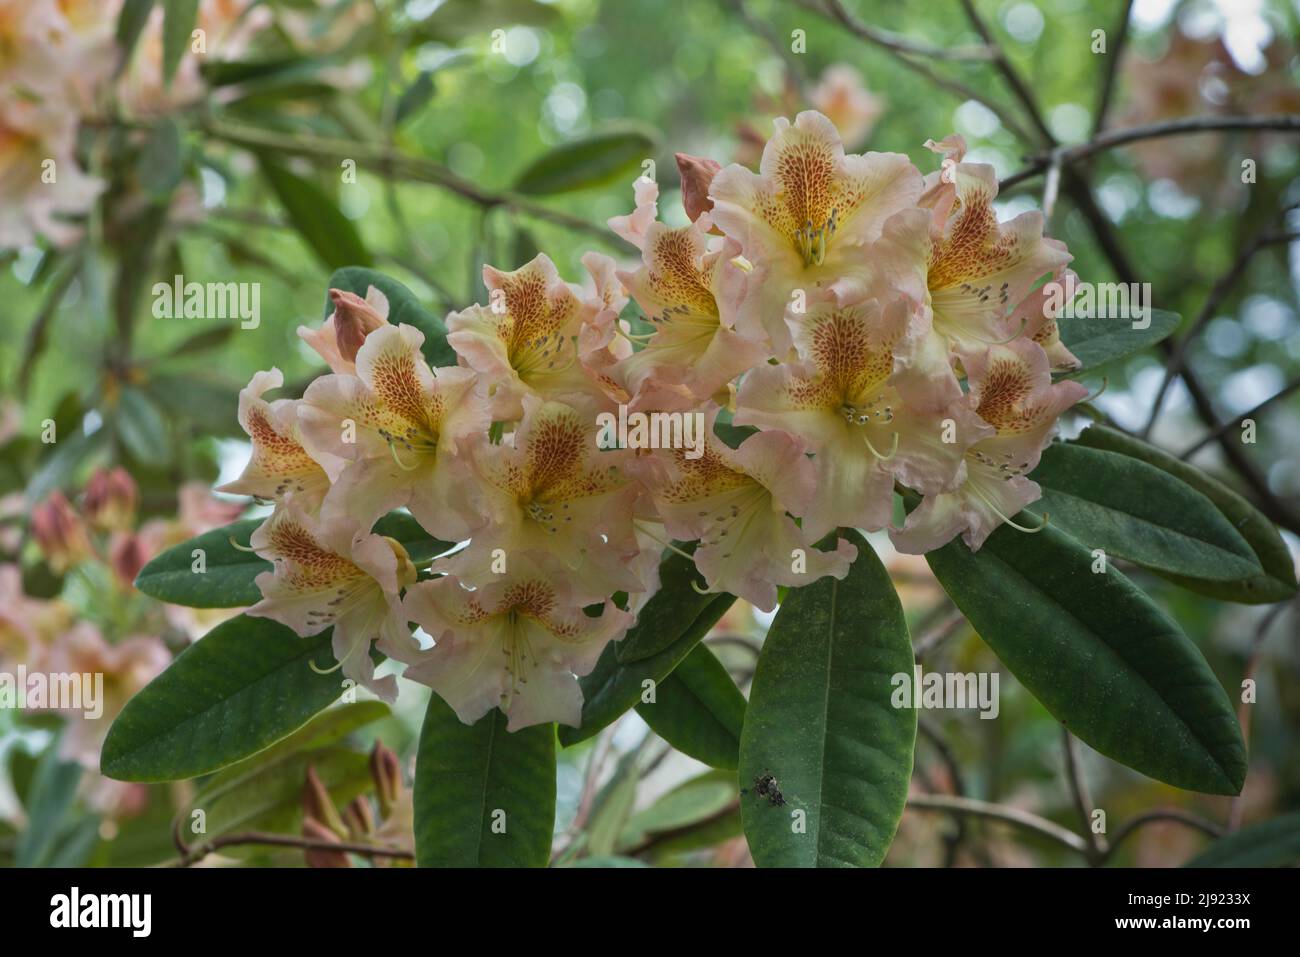 Rhododendrons (Rhododendron), cultivar Amber, Emsland, Lower Saxony, Germany Stock Photo